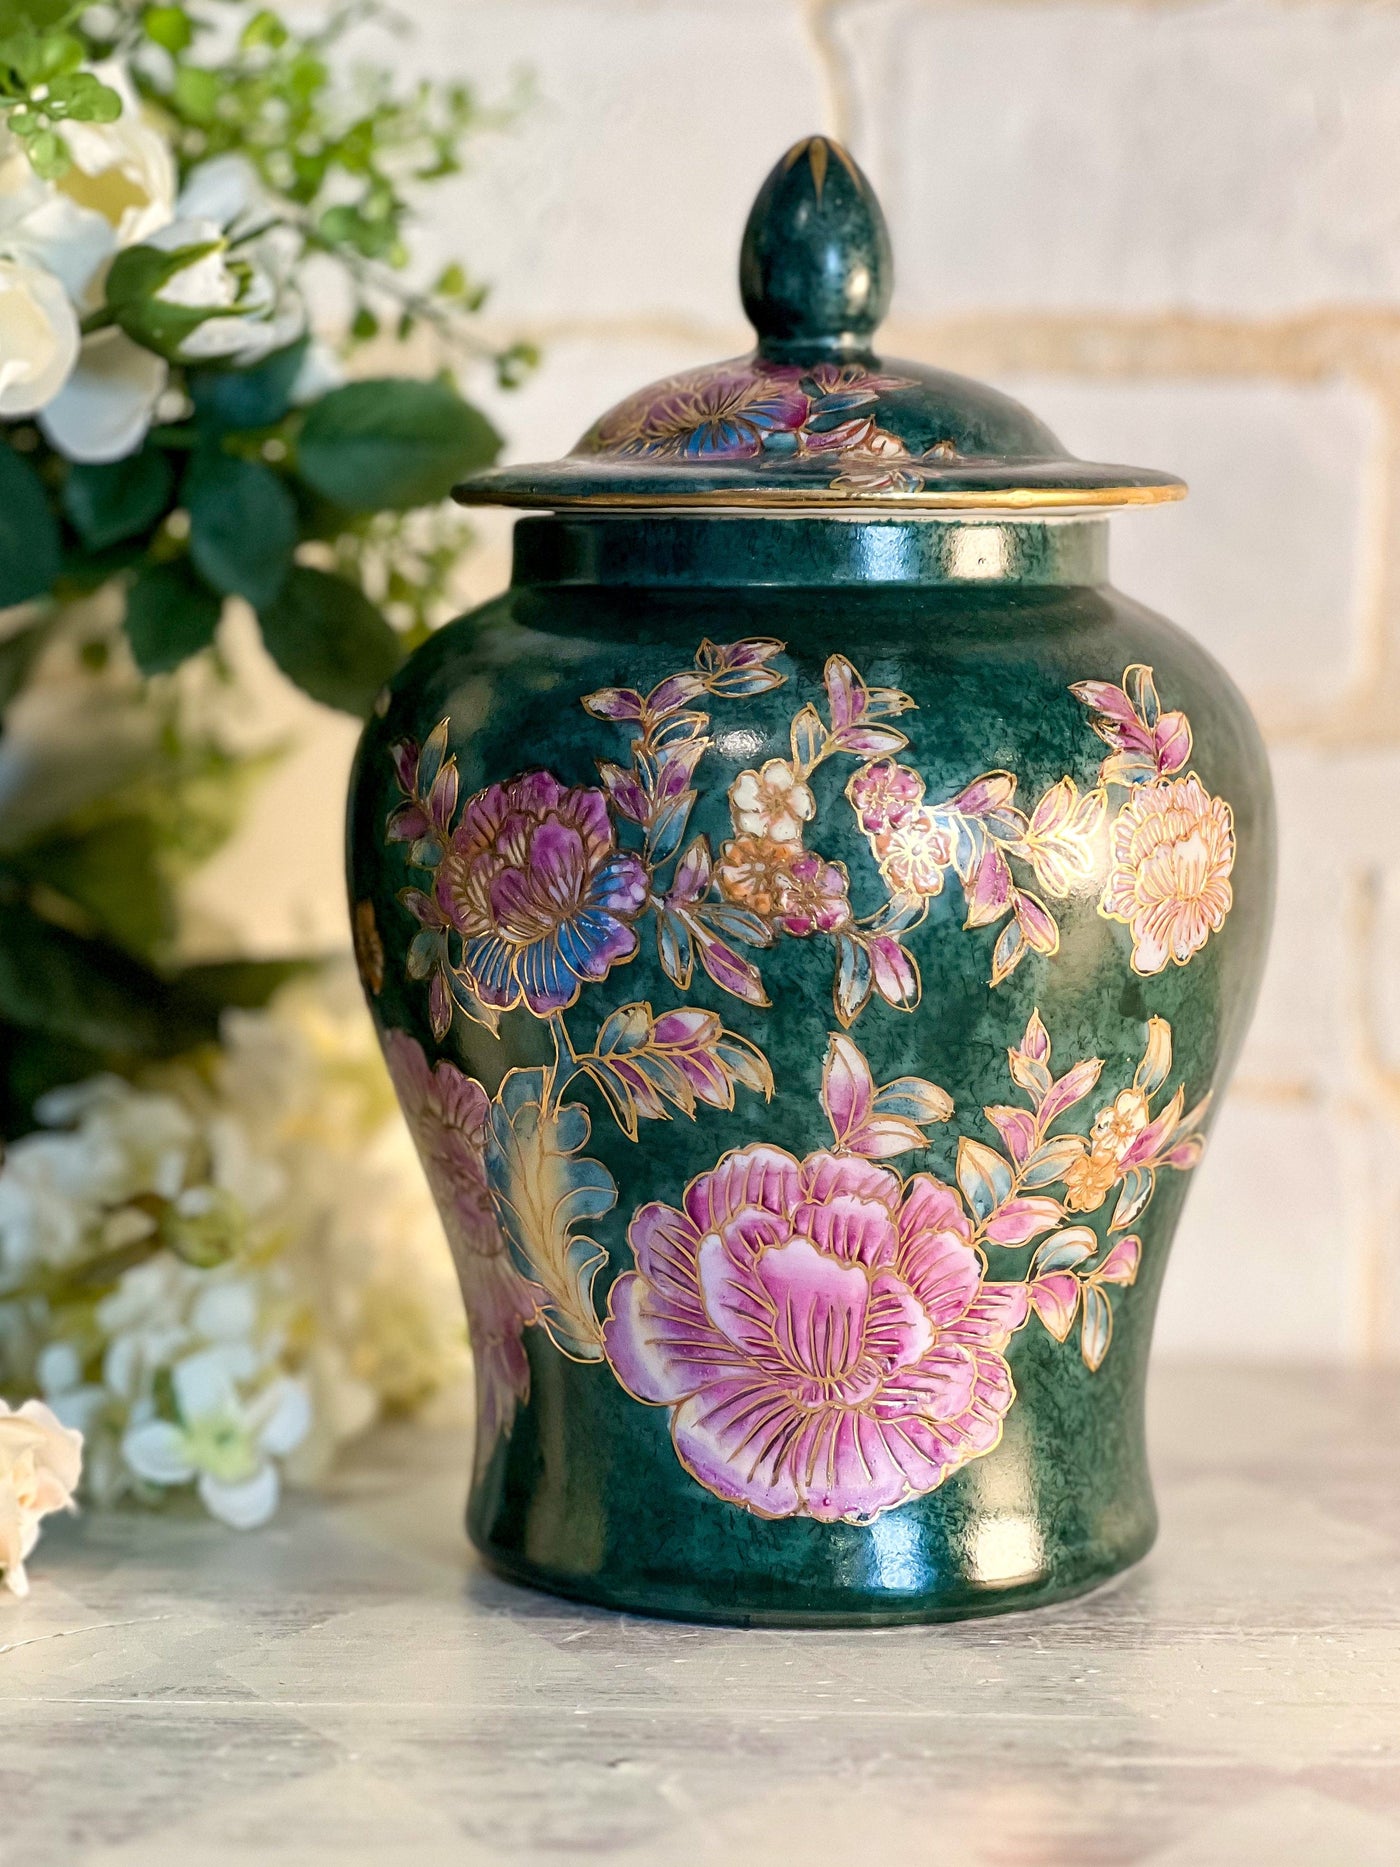 FLORAL & GOLD LEAF ASIAN MOTIF VINTAGE JAR Revive In Style Vintage Furniture Painted Refinished Redesign Beautiful One of a Kind Artistic Antique Unique Home Decor Interior Design French Country Shabby Chic Cottage Farmhouse Grandmillenial Coastal Chalk Paint Metallic Glam Eclectic Quality Dovetailed Rustic Furniture Painter Pinterest Bedroom Living Room Entryway Kitchen Home Trends House Styles Decorating ideas